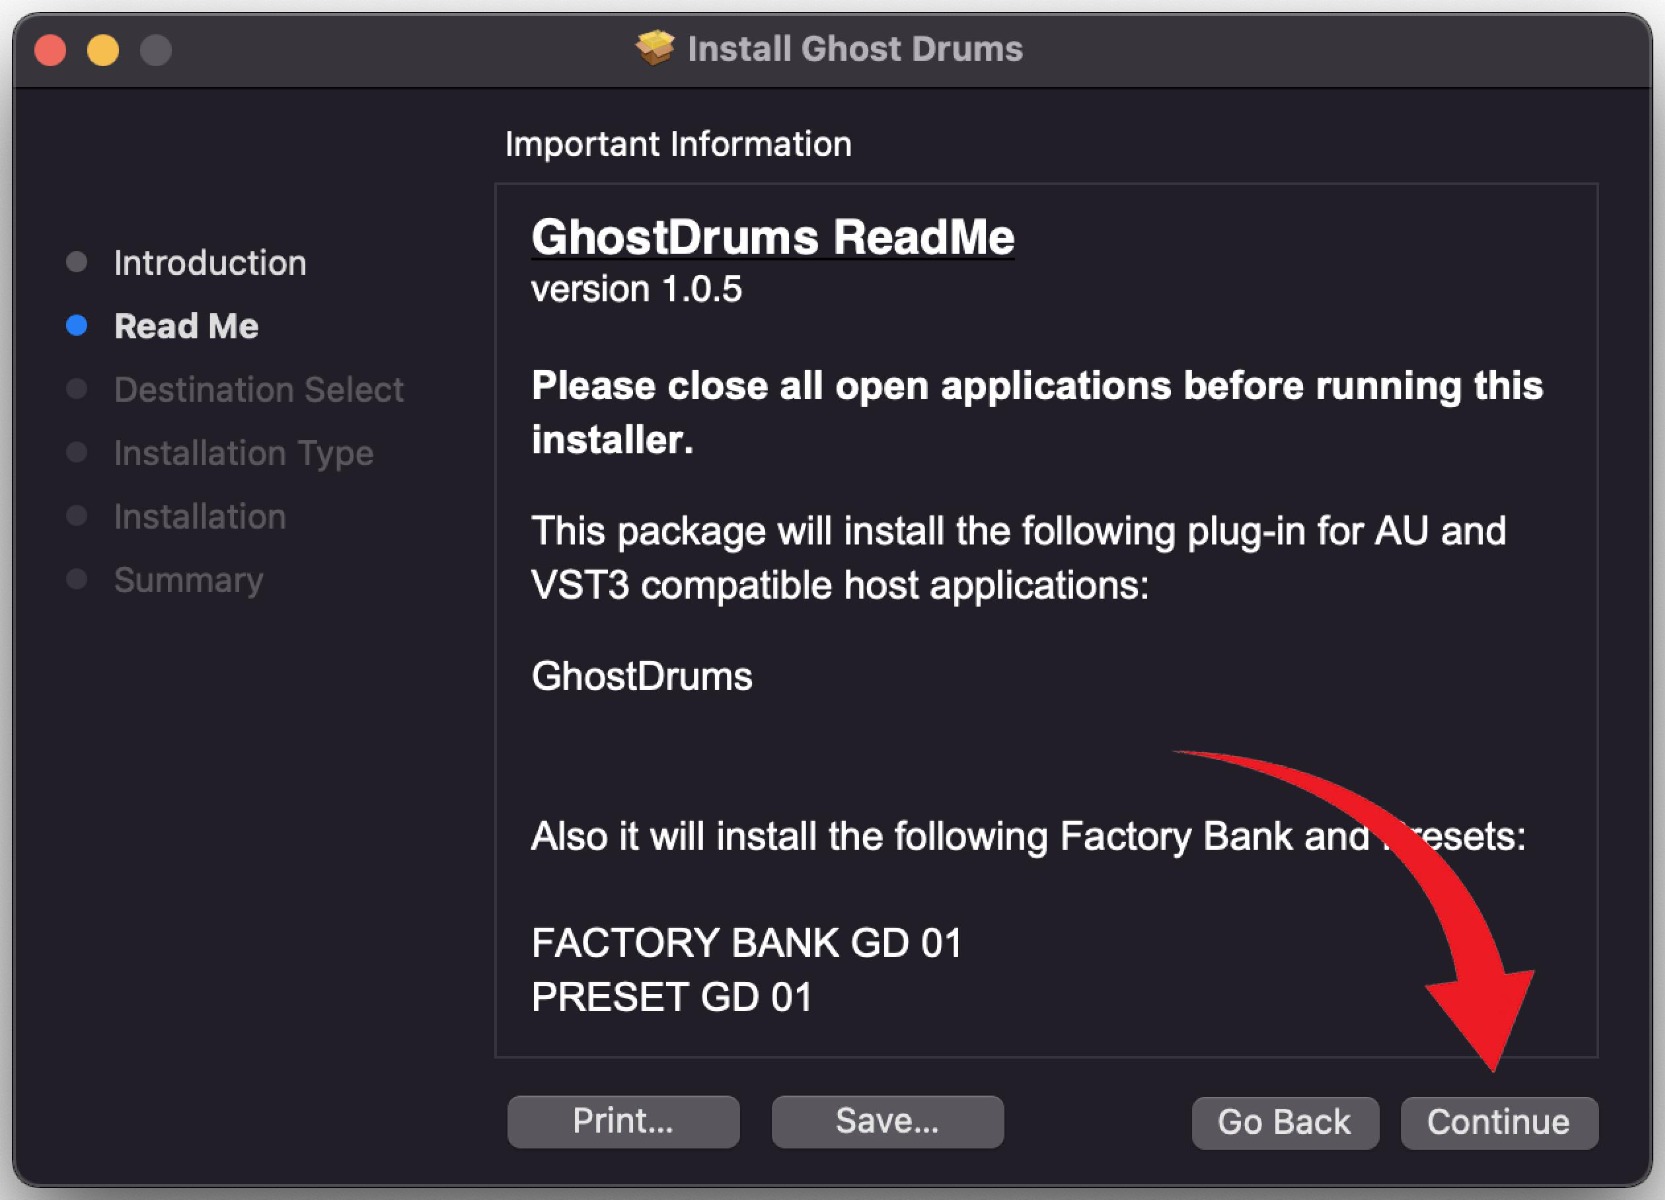 How to Install Drum Plugin Ghost Drums on macOS Step 5